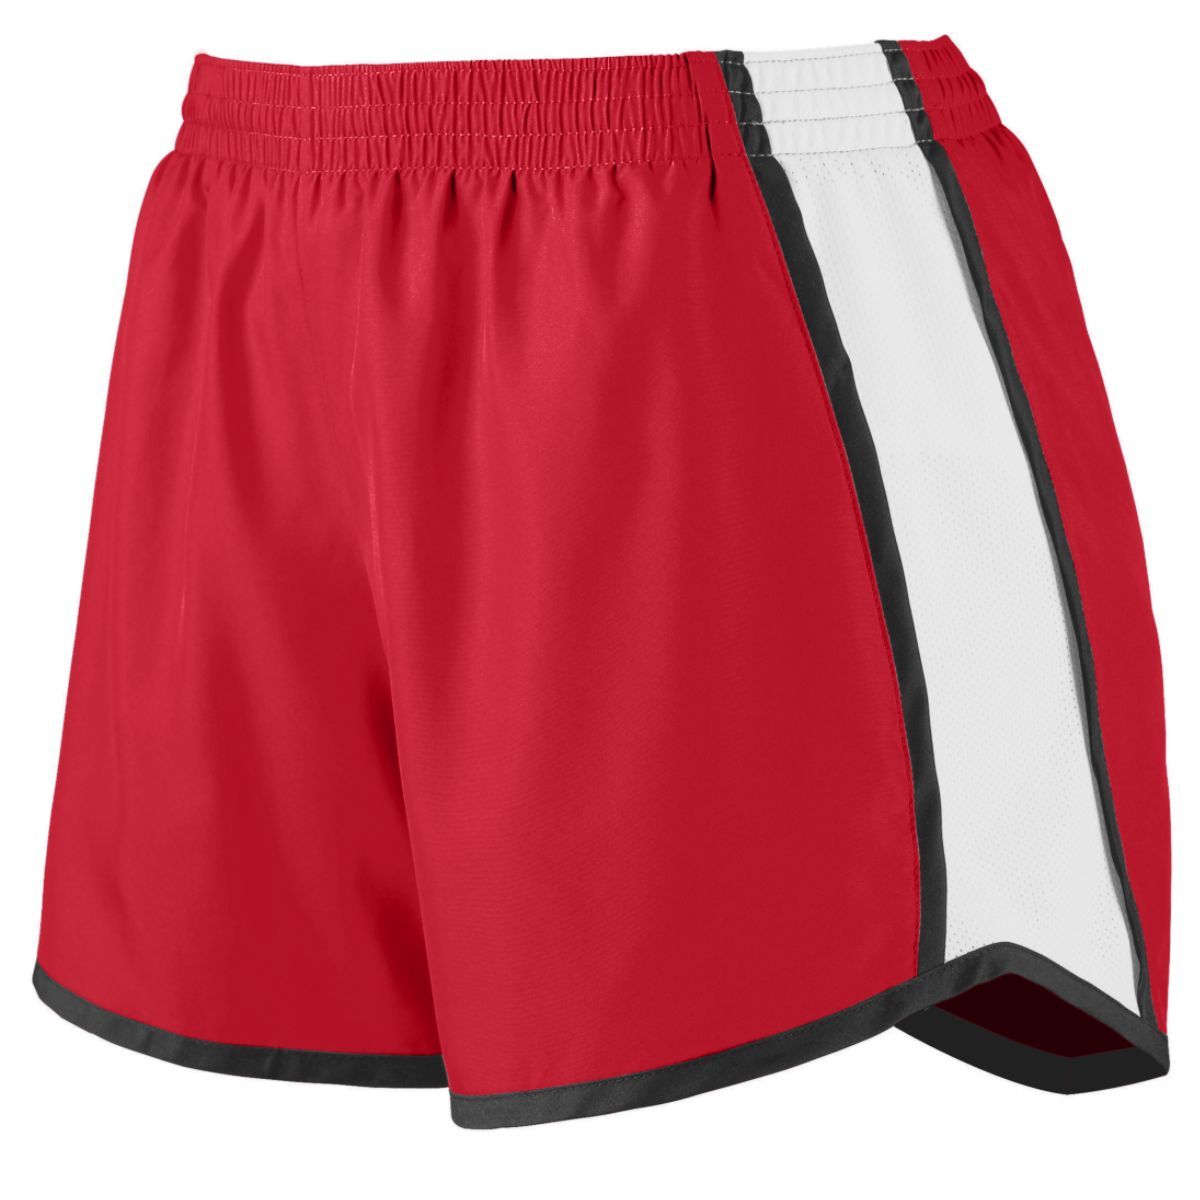 Augusta Sportswear Girls Pulse Team Shorts in Red/White/Black  -Part of the Girls, Augusta-Products, Volleyball, Girls-Shorts product lines at KanaleyCreations.com